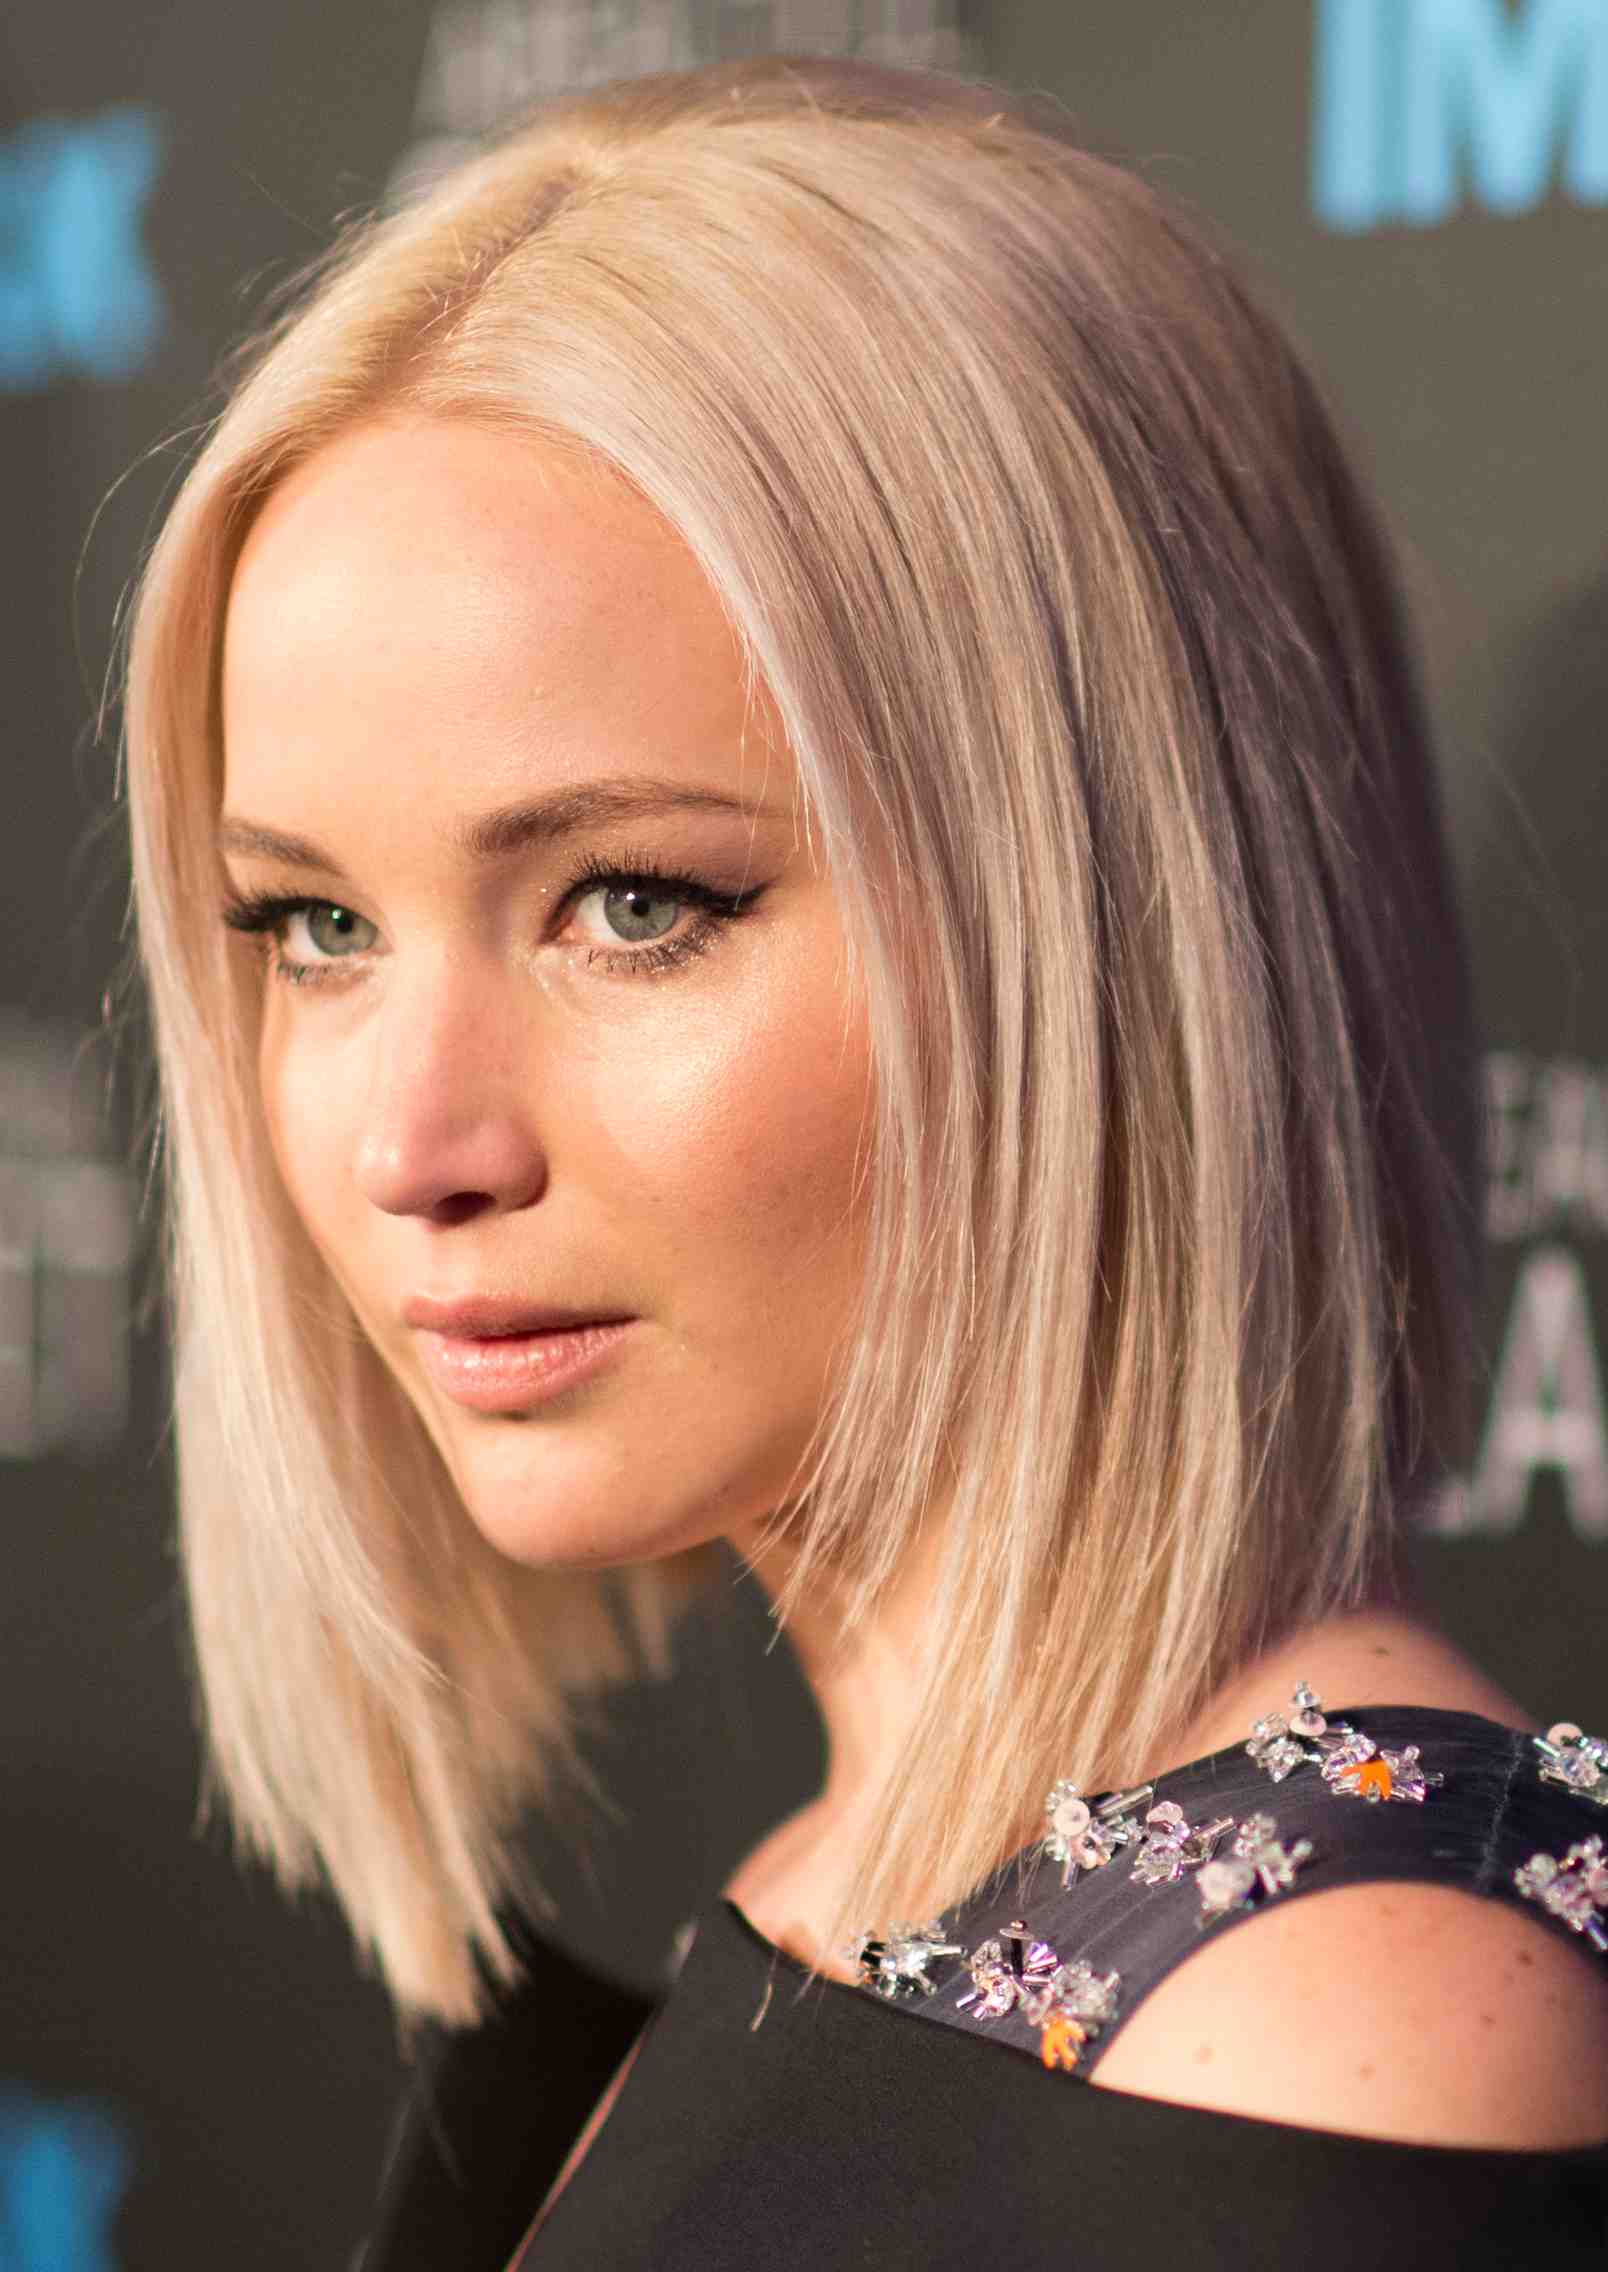 Dive into the bare truth on Jennifer Lawrence's refusal to revisit 'Hunger Games', her career crossroads and the infamous 'Jennifer Lawrence nude' incident. Read on!